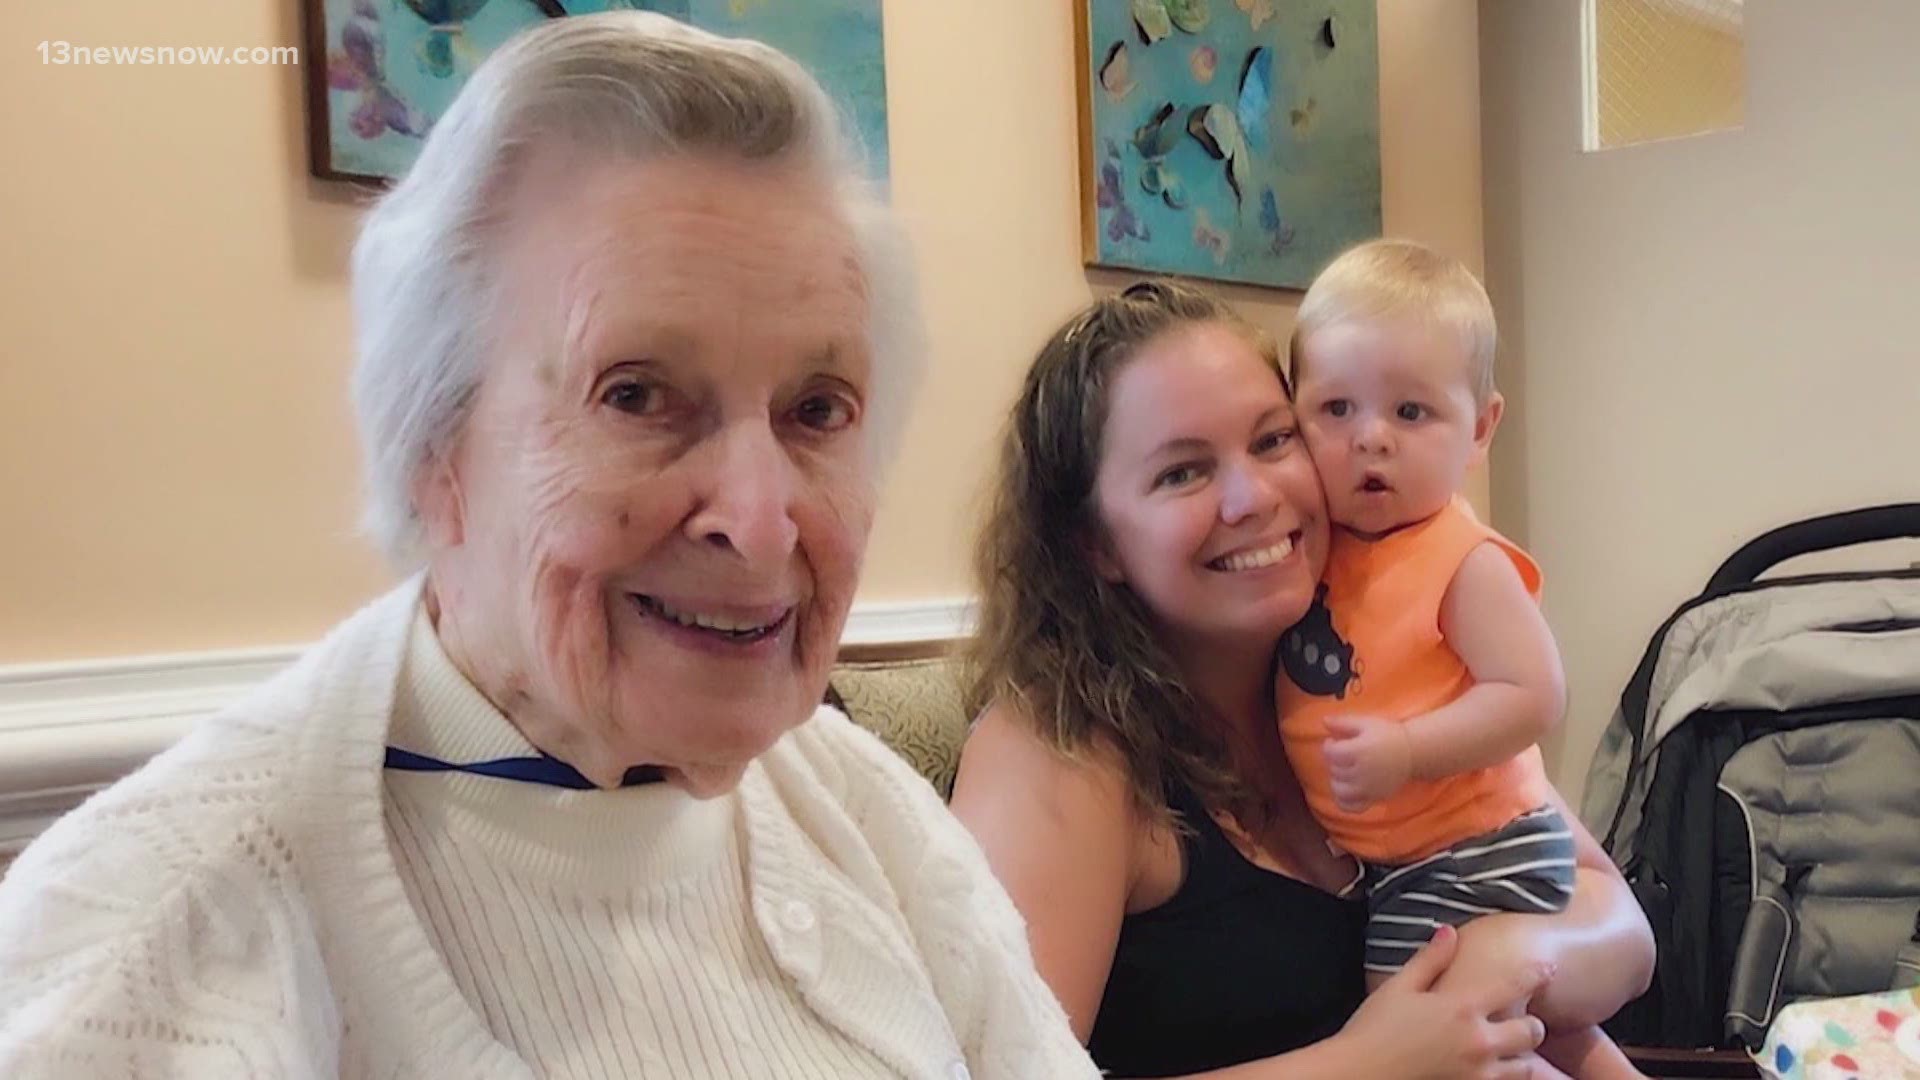 Mary Heeke contracted coronavirus in a Virginia Beach senior home. She died days later in the hospital. Her daughter shares her heartbreak and what needs to change.